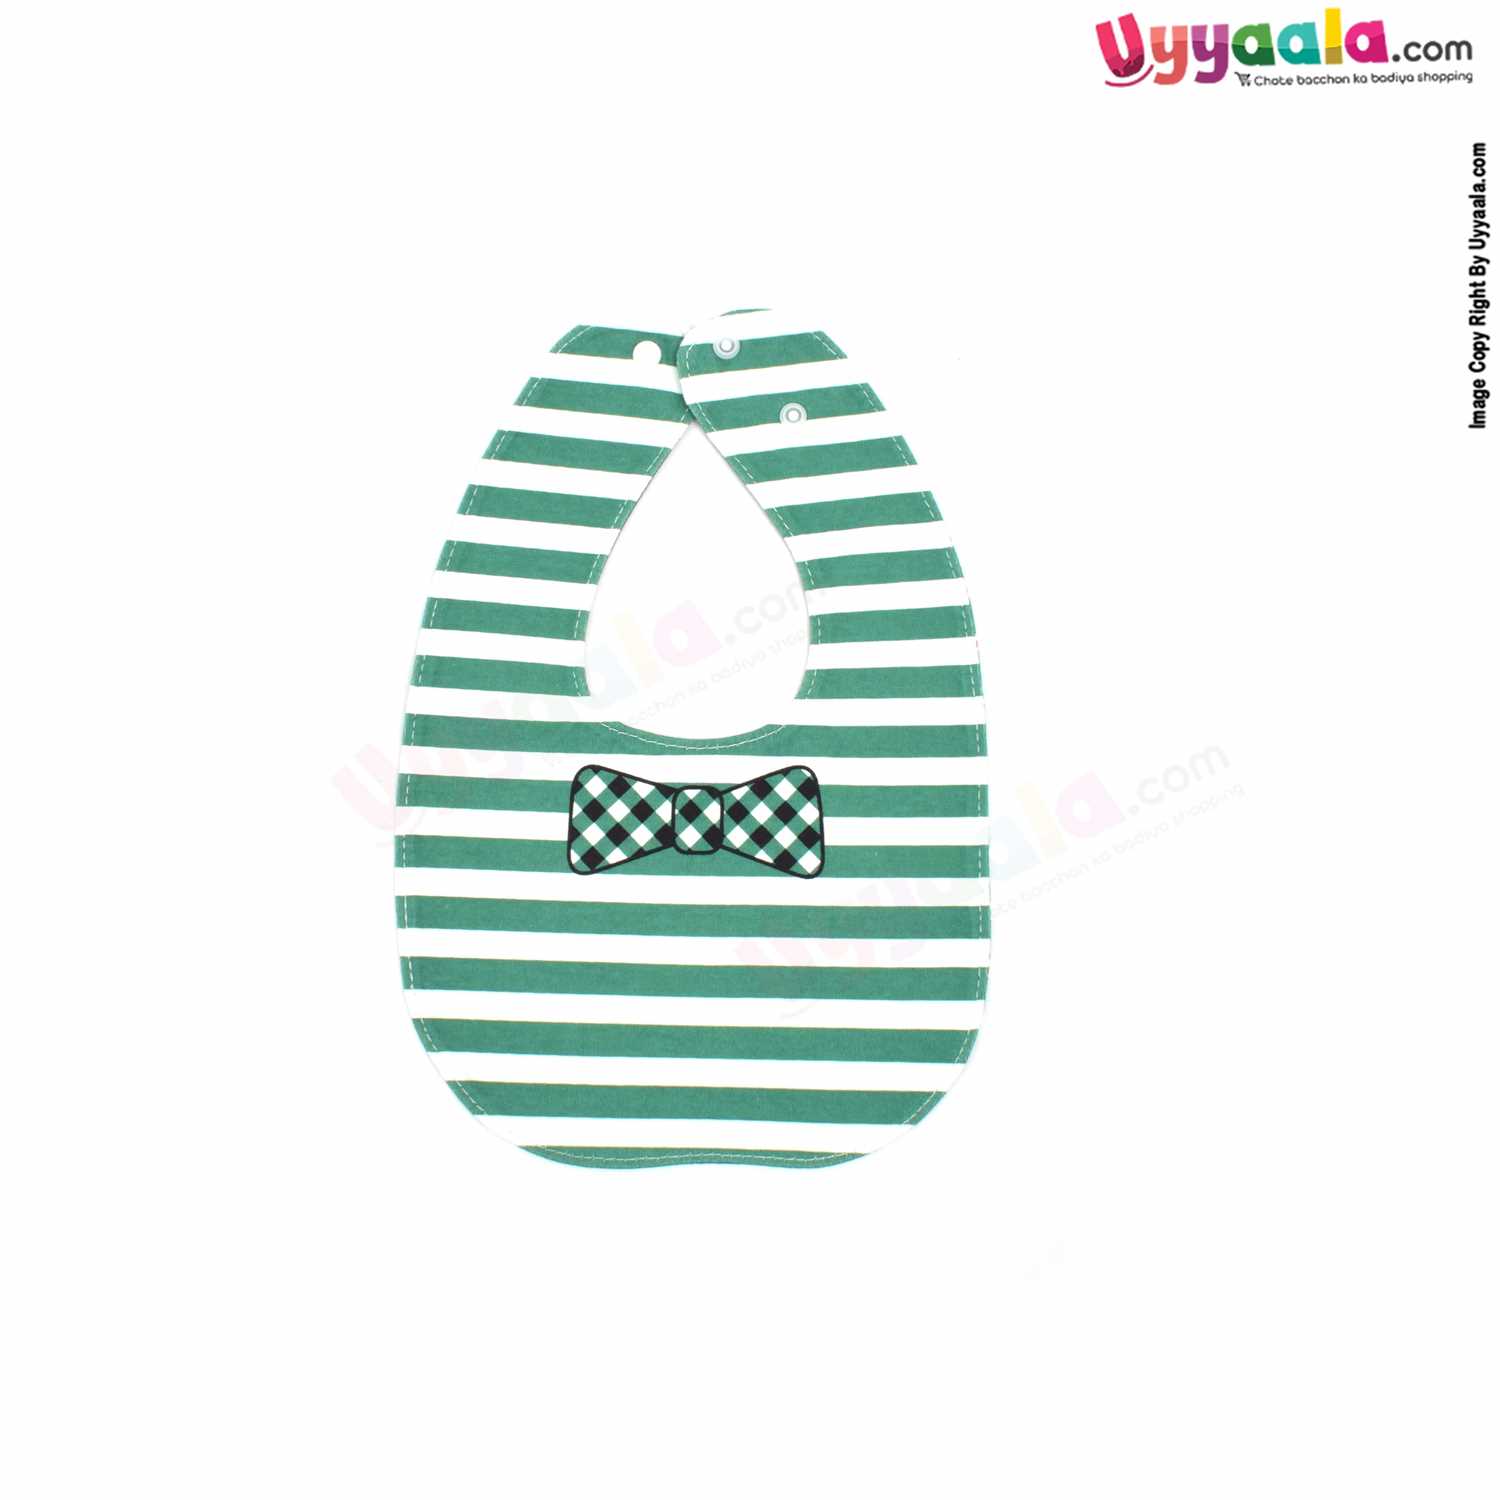 Baby Bib Soft Hosiery Cotton 2 in 1 Usable with Bow & Stripes Print for Newborn, Size (29.5*20cm)- Green & White